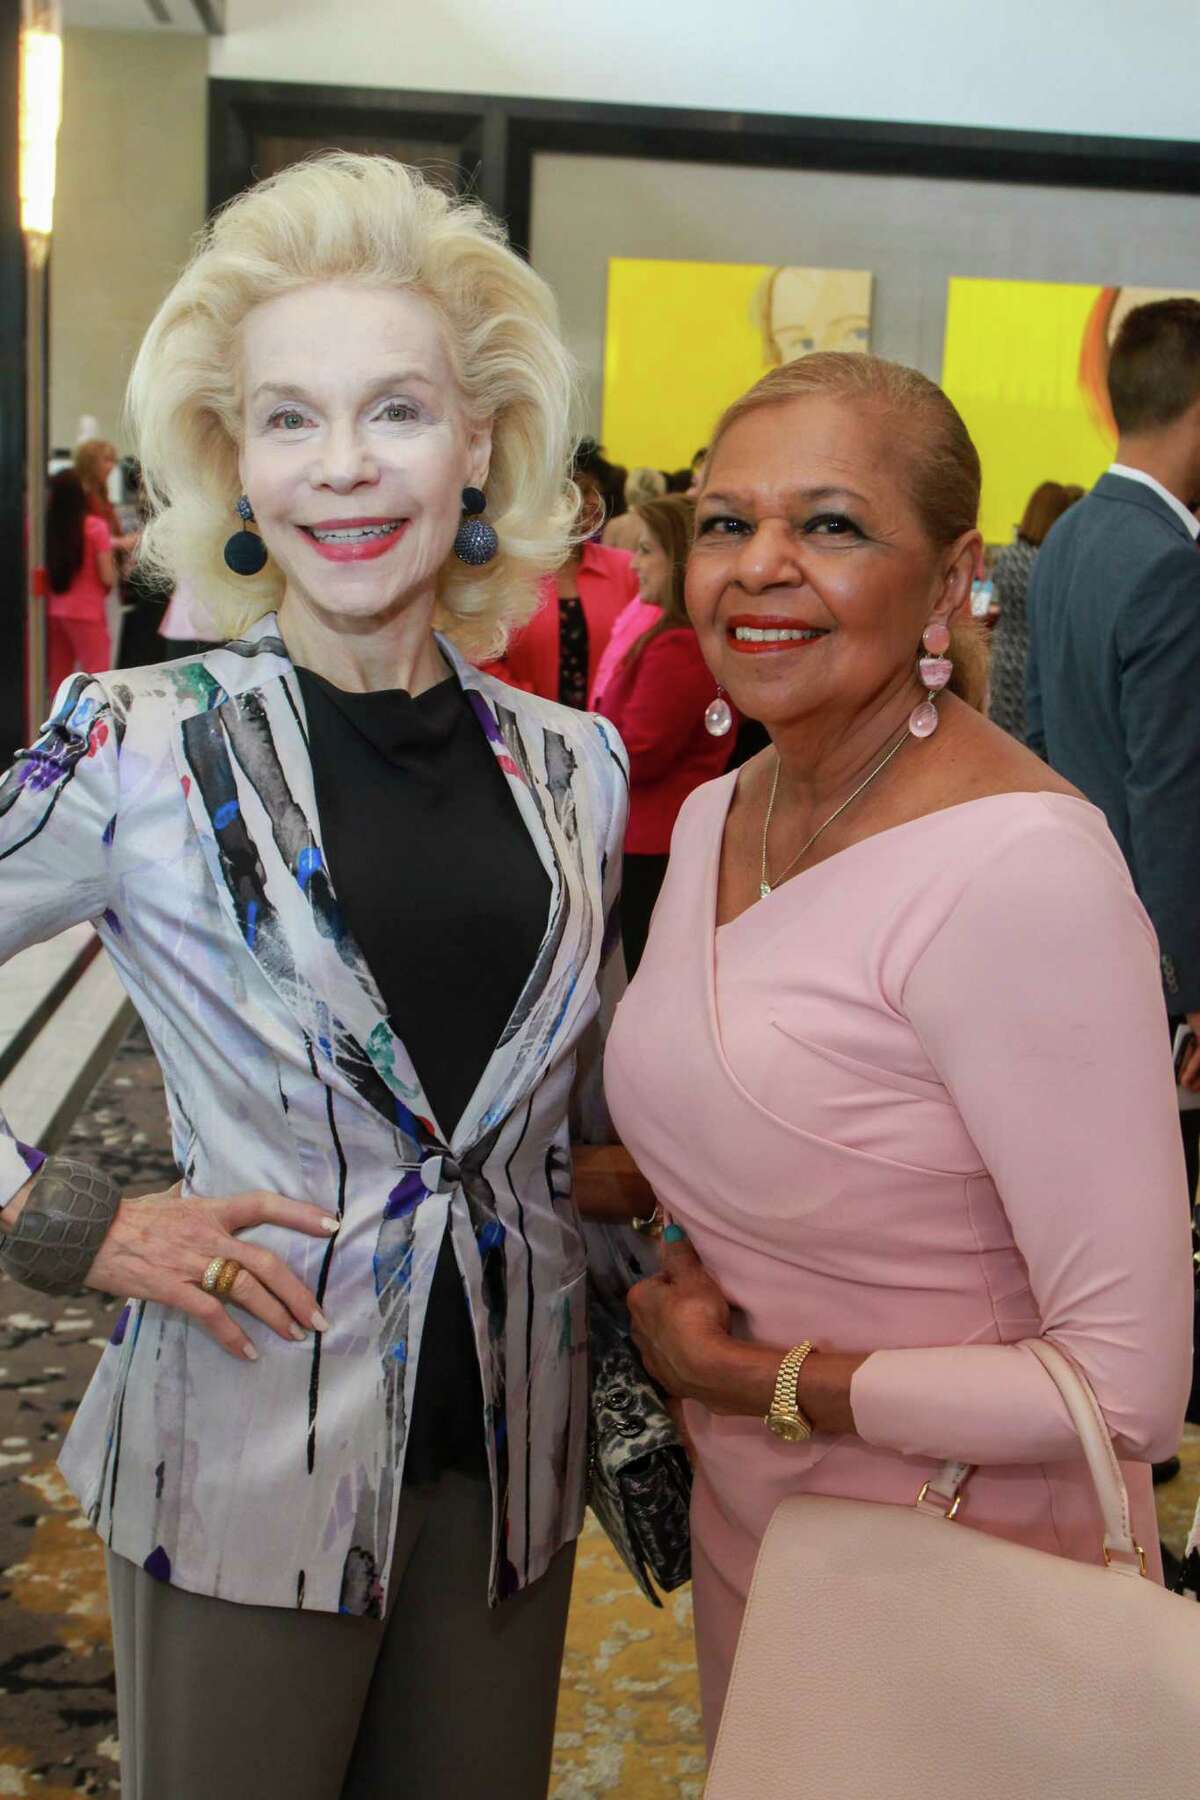 Lynn Wyatt, left, and Dr. Yvonne Cormier at the 10th annual Razzle Dazzle luncheon at the Post Oak Hotel at Uptown on October 10, 2019.